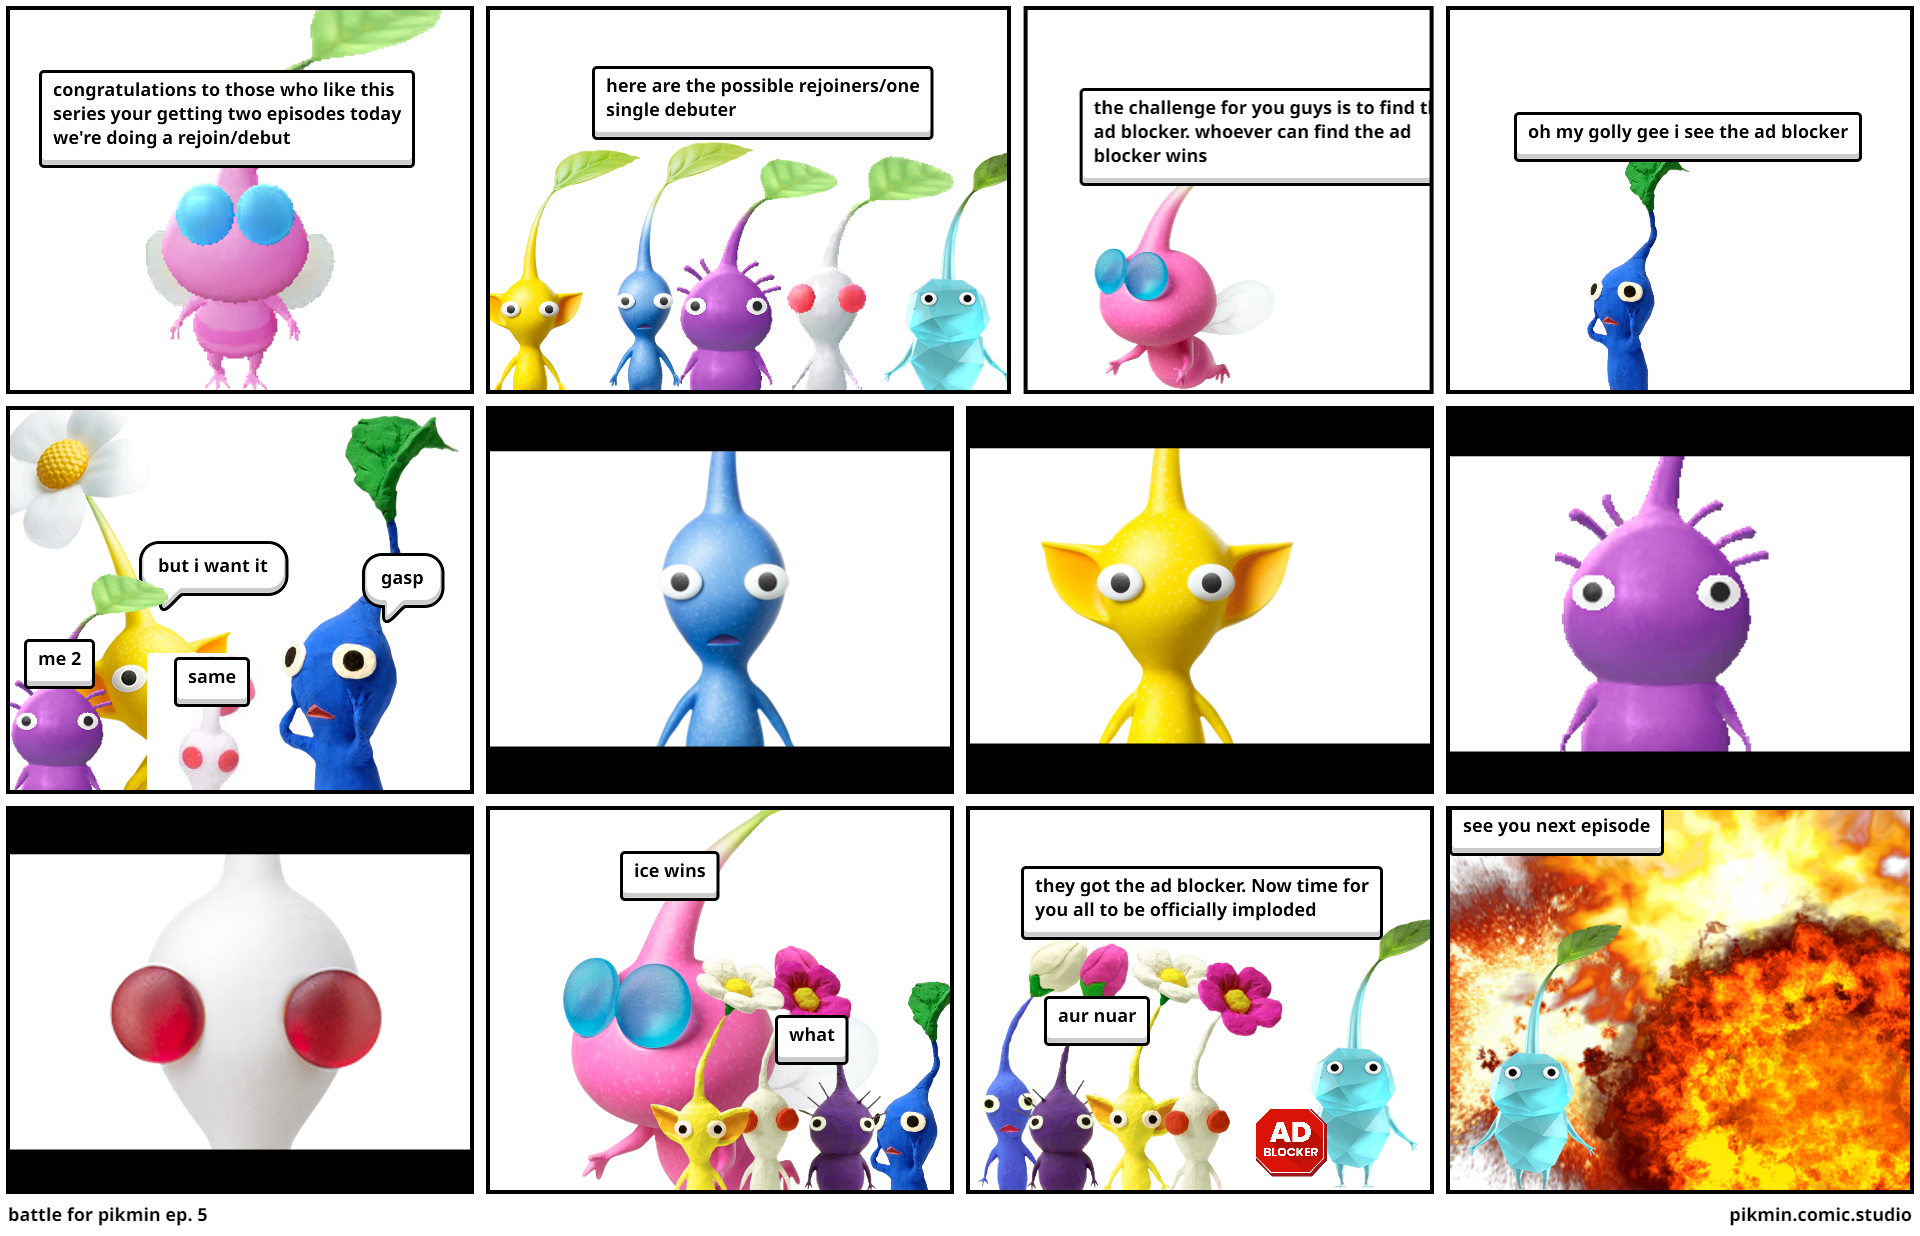 battle for pikmin ep. 5